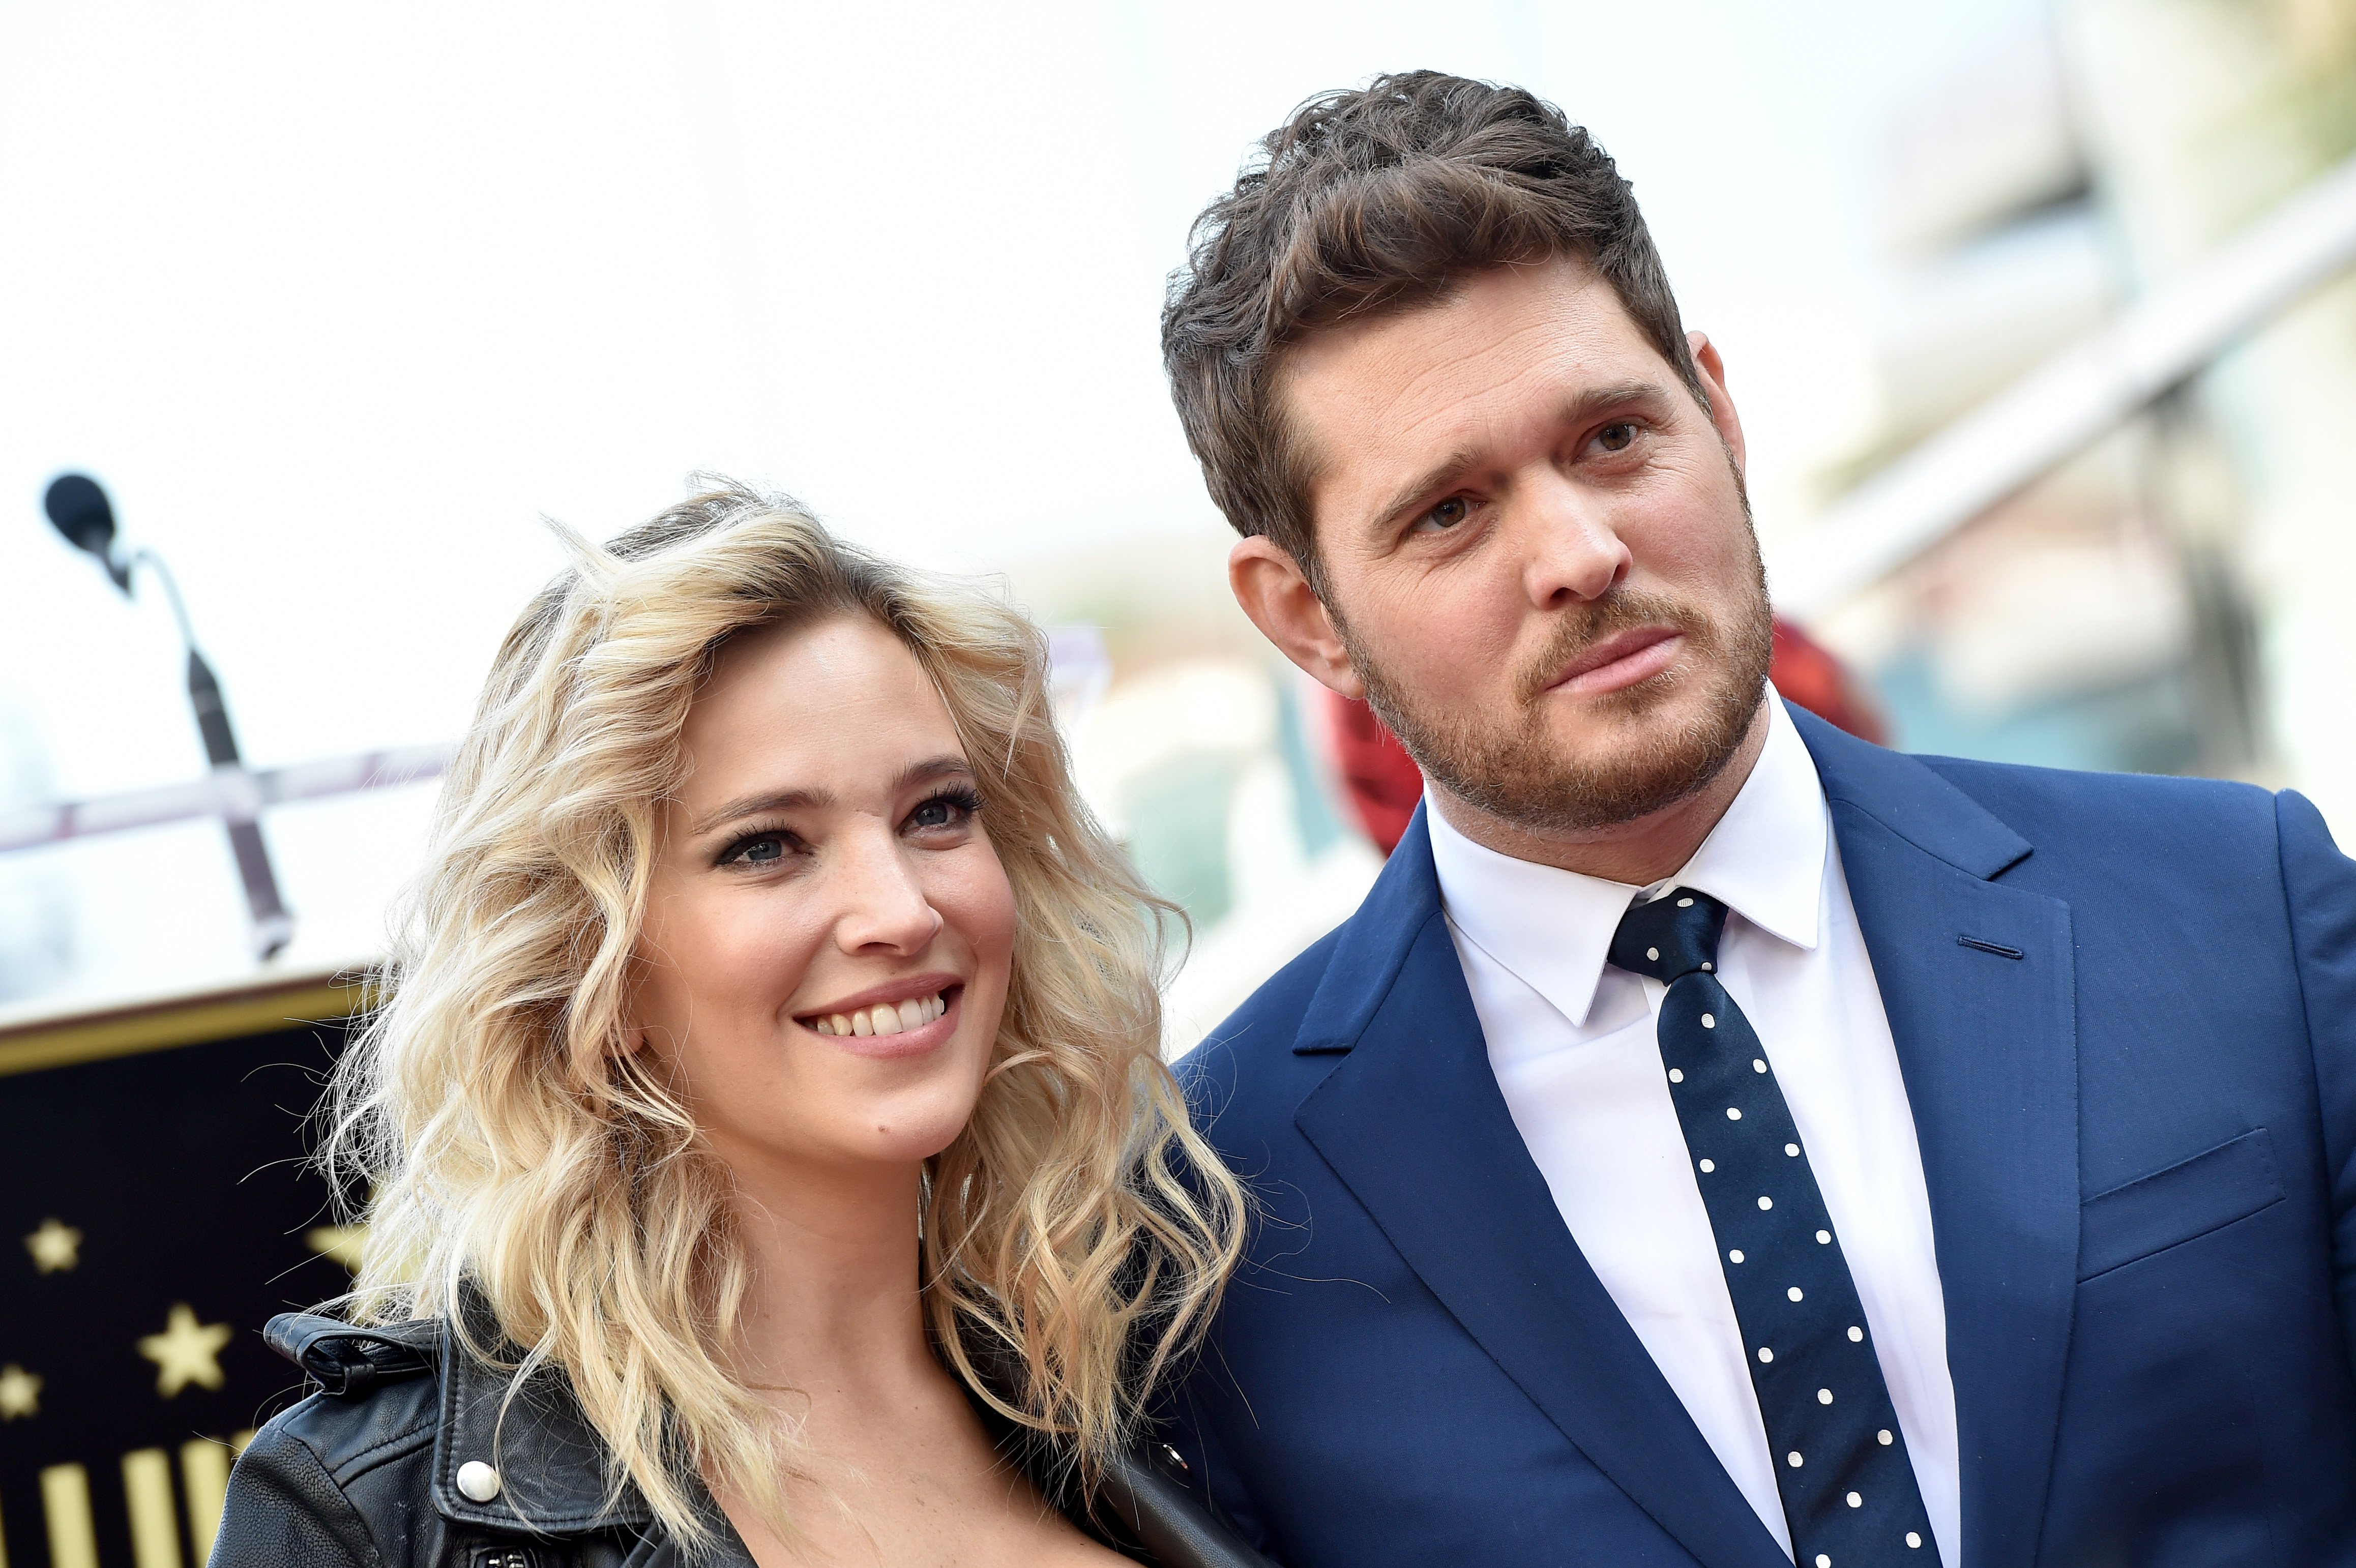  Michael Buble and Luisana Lopilato attend the ceremony honoring Michael Buble with star on the Hollywood Walk of Fame on November 16, 2018, in Hollywood, California. | Source: Getty Images.